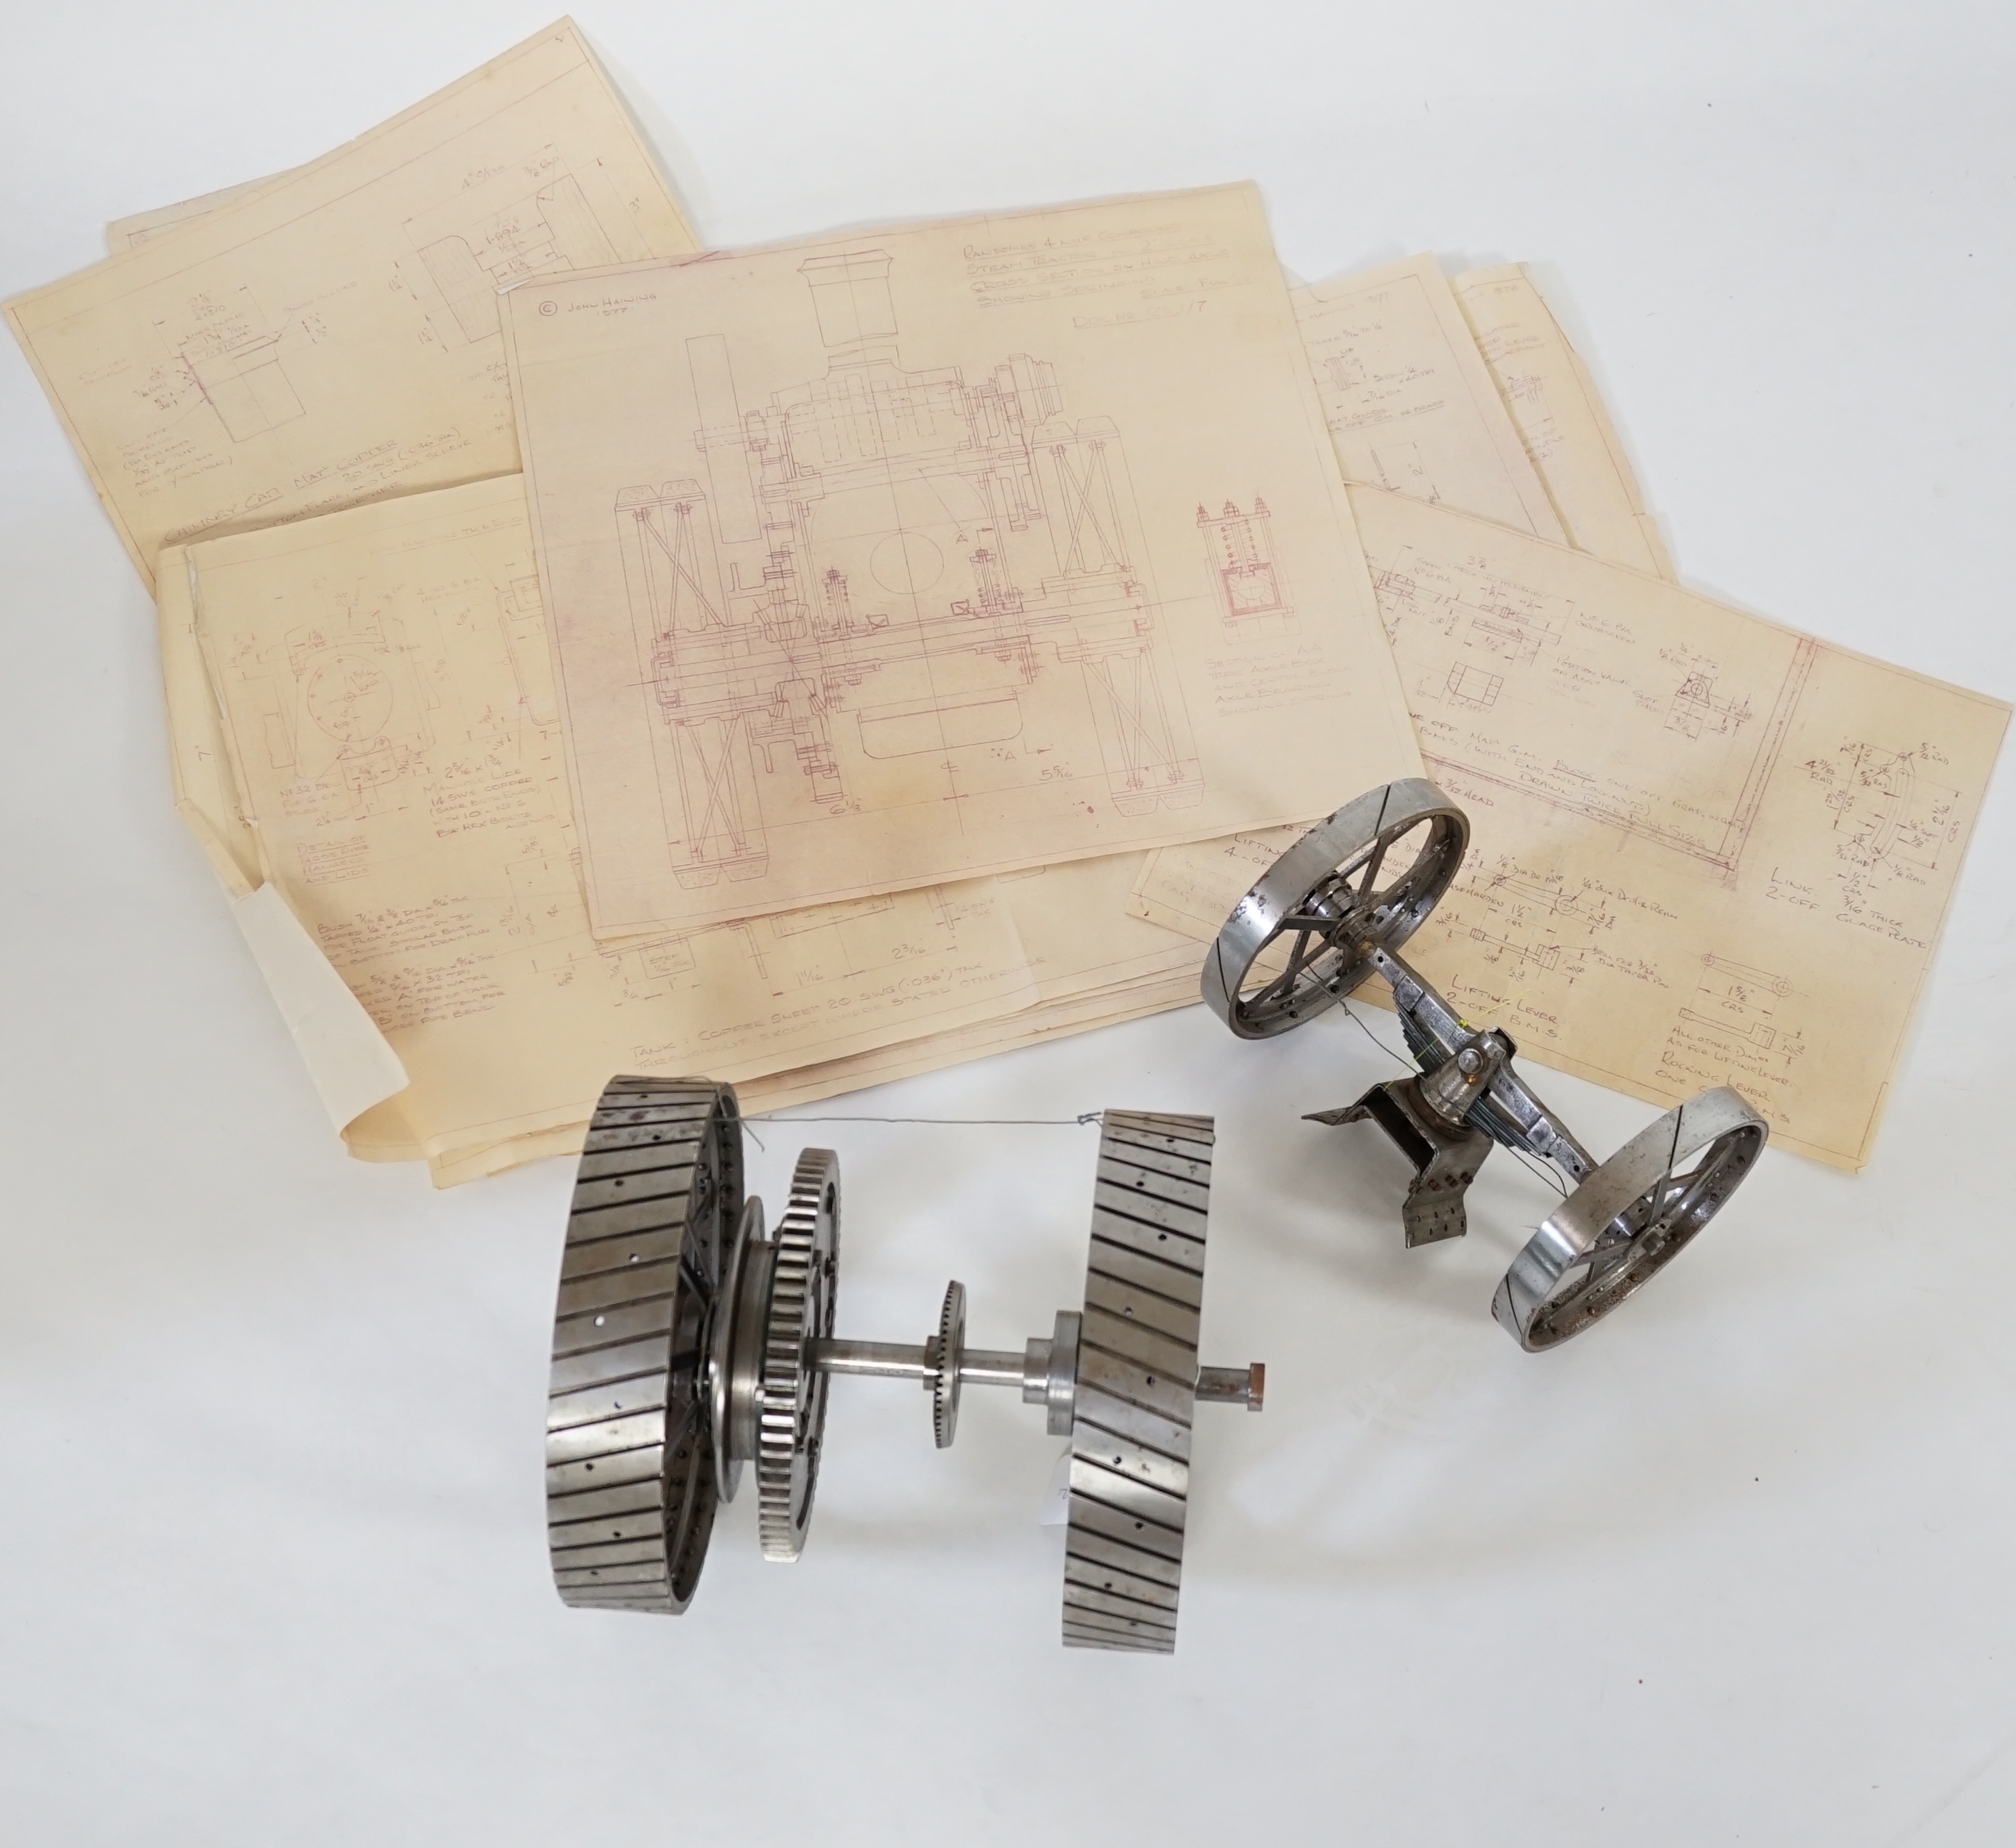 A partially constructed kit comprising of the major components of machined and cast parts to build a two inch scale live steam Ransomes 4 N.H.P. traction engine, including a set of drawings